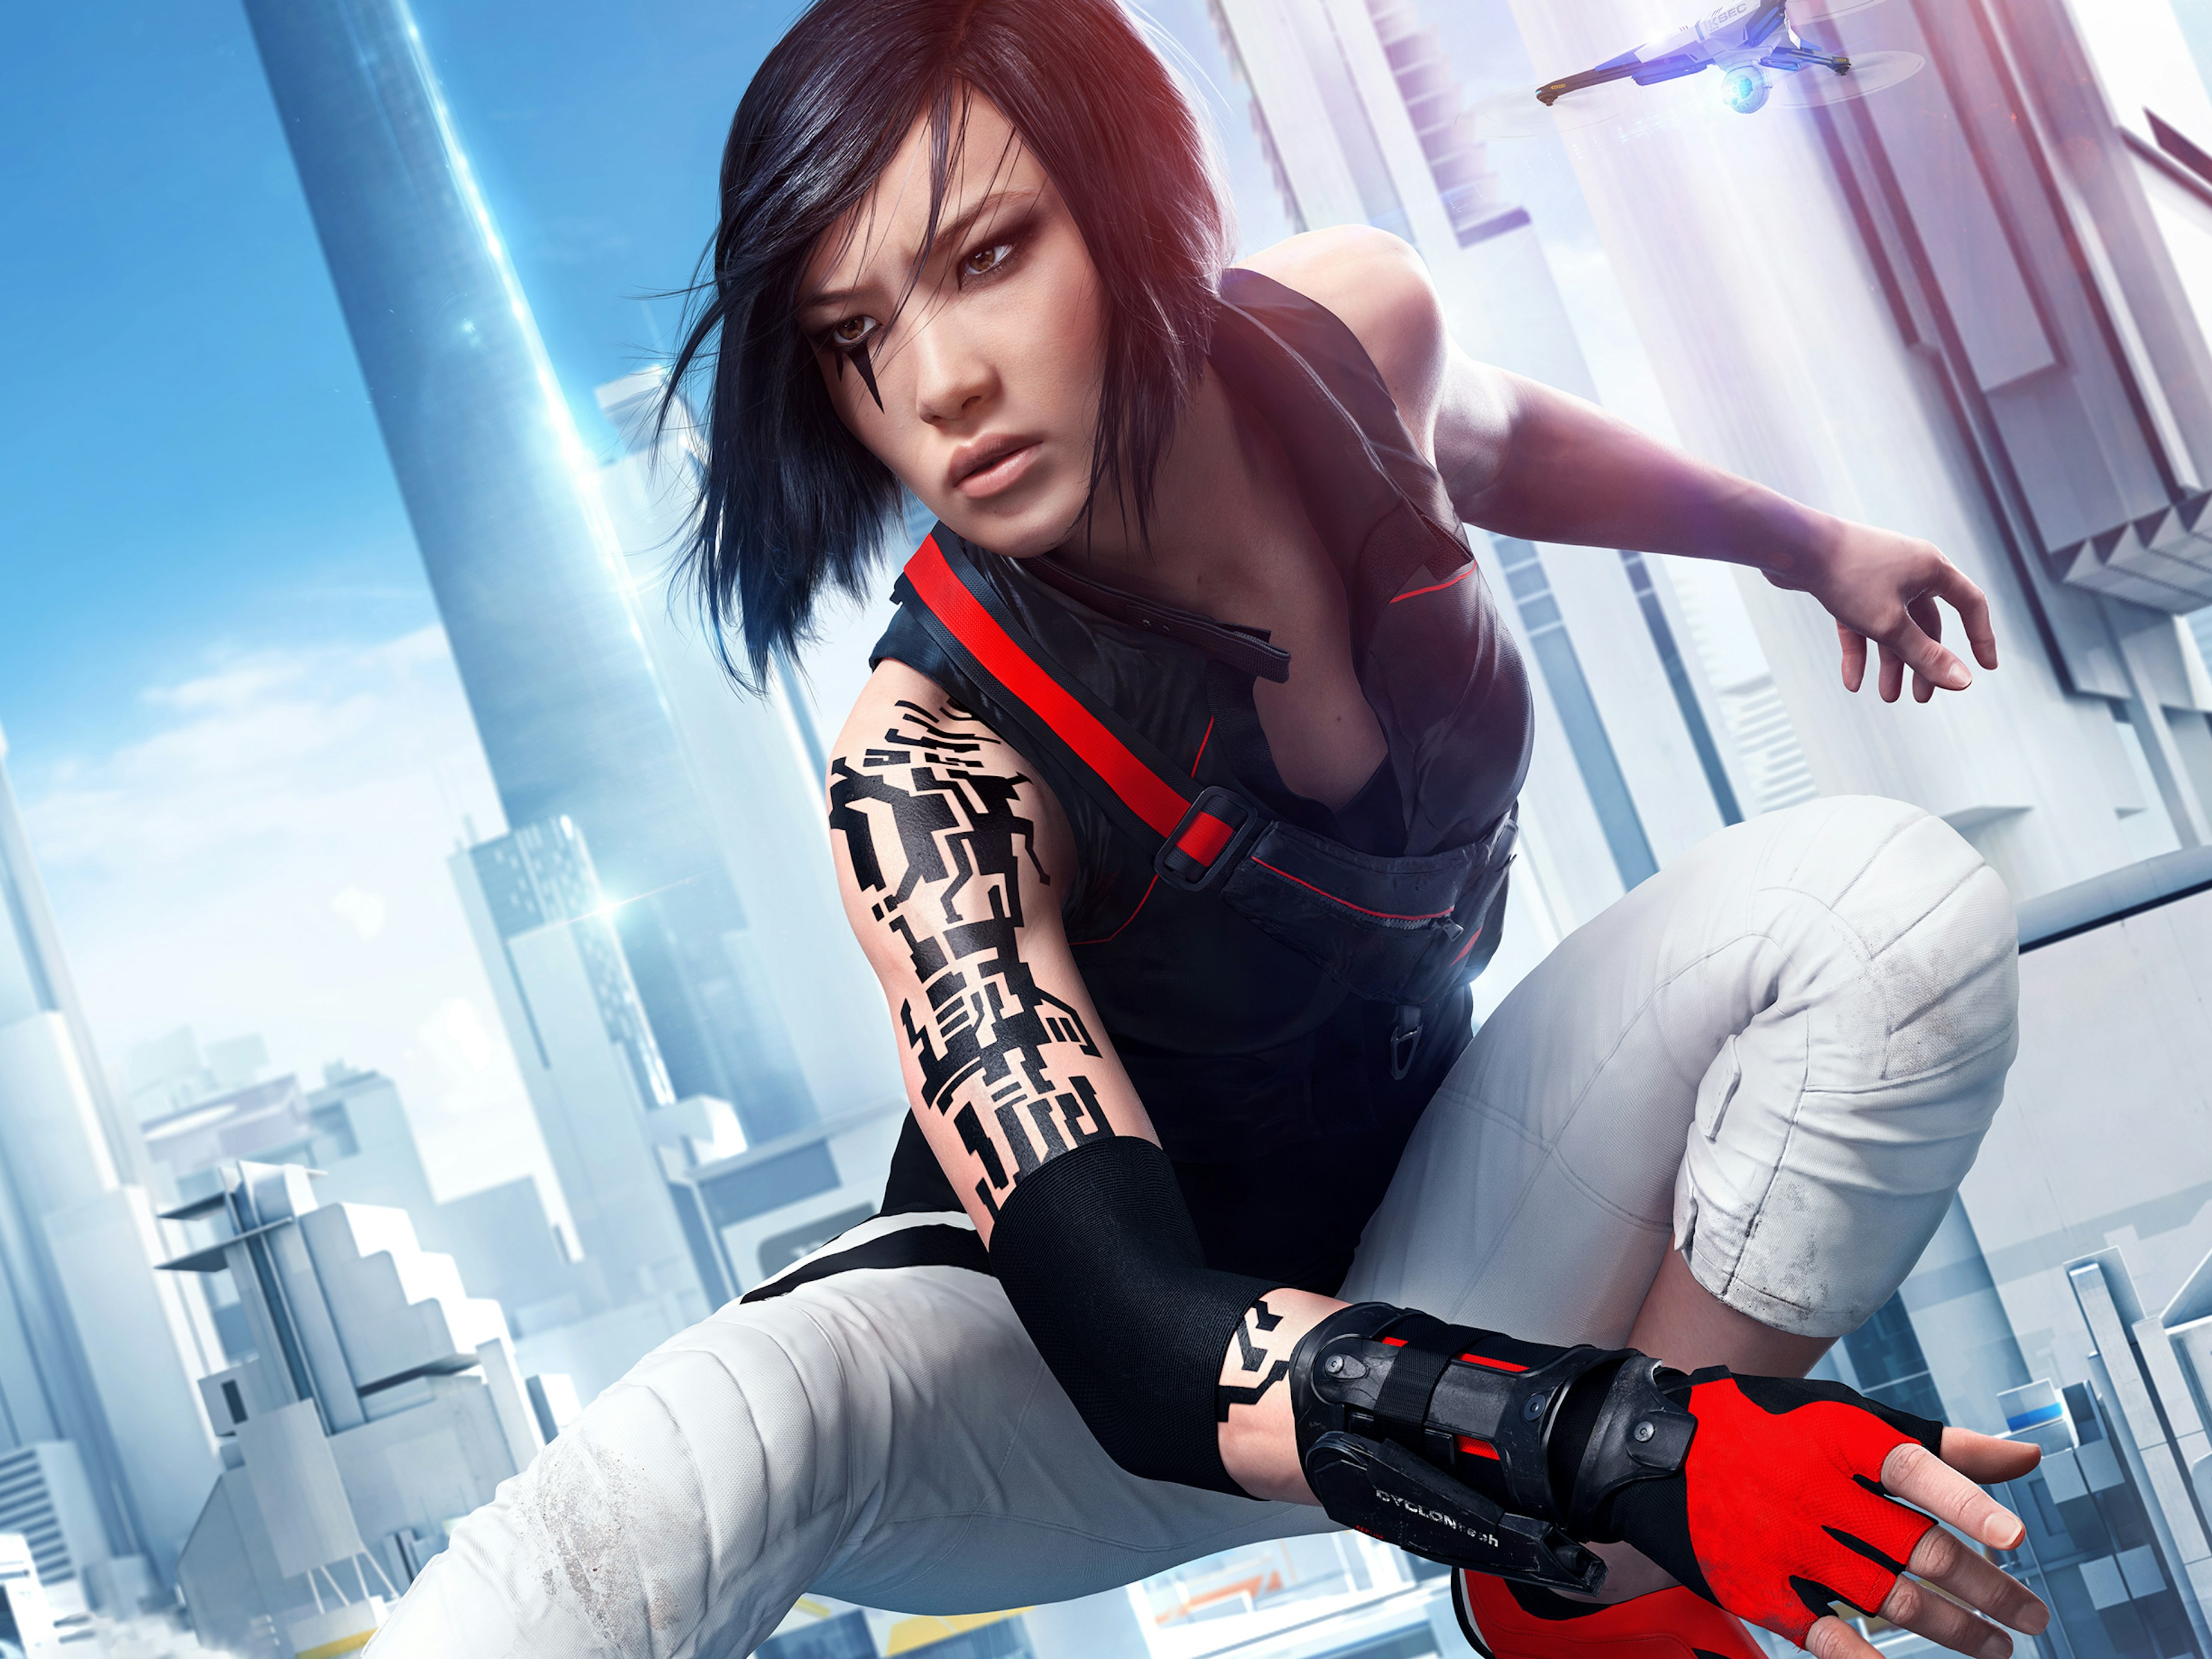 Mirror S Edge Catalyst Story Trailer Proves It S More Than A Sleek Update Inverse